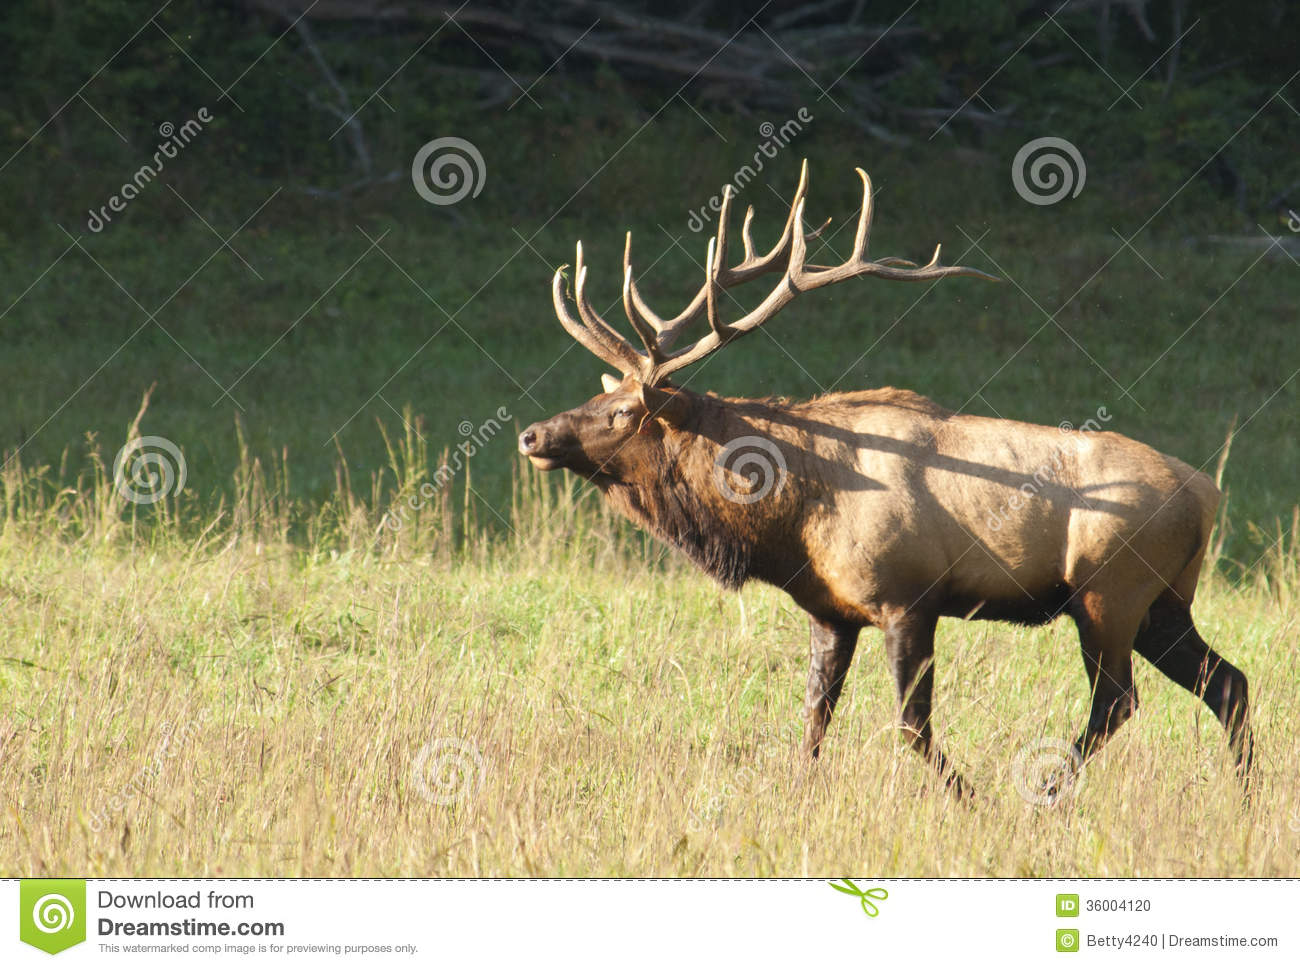 Bull Elk Sounds A Bugle In The Rutting Season At Cataloochee Part Of